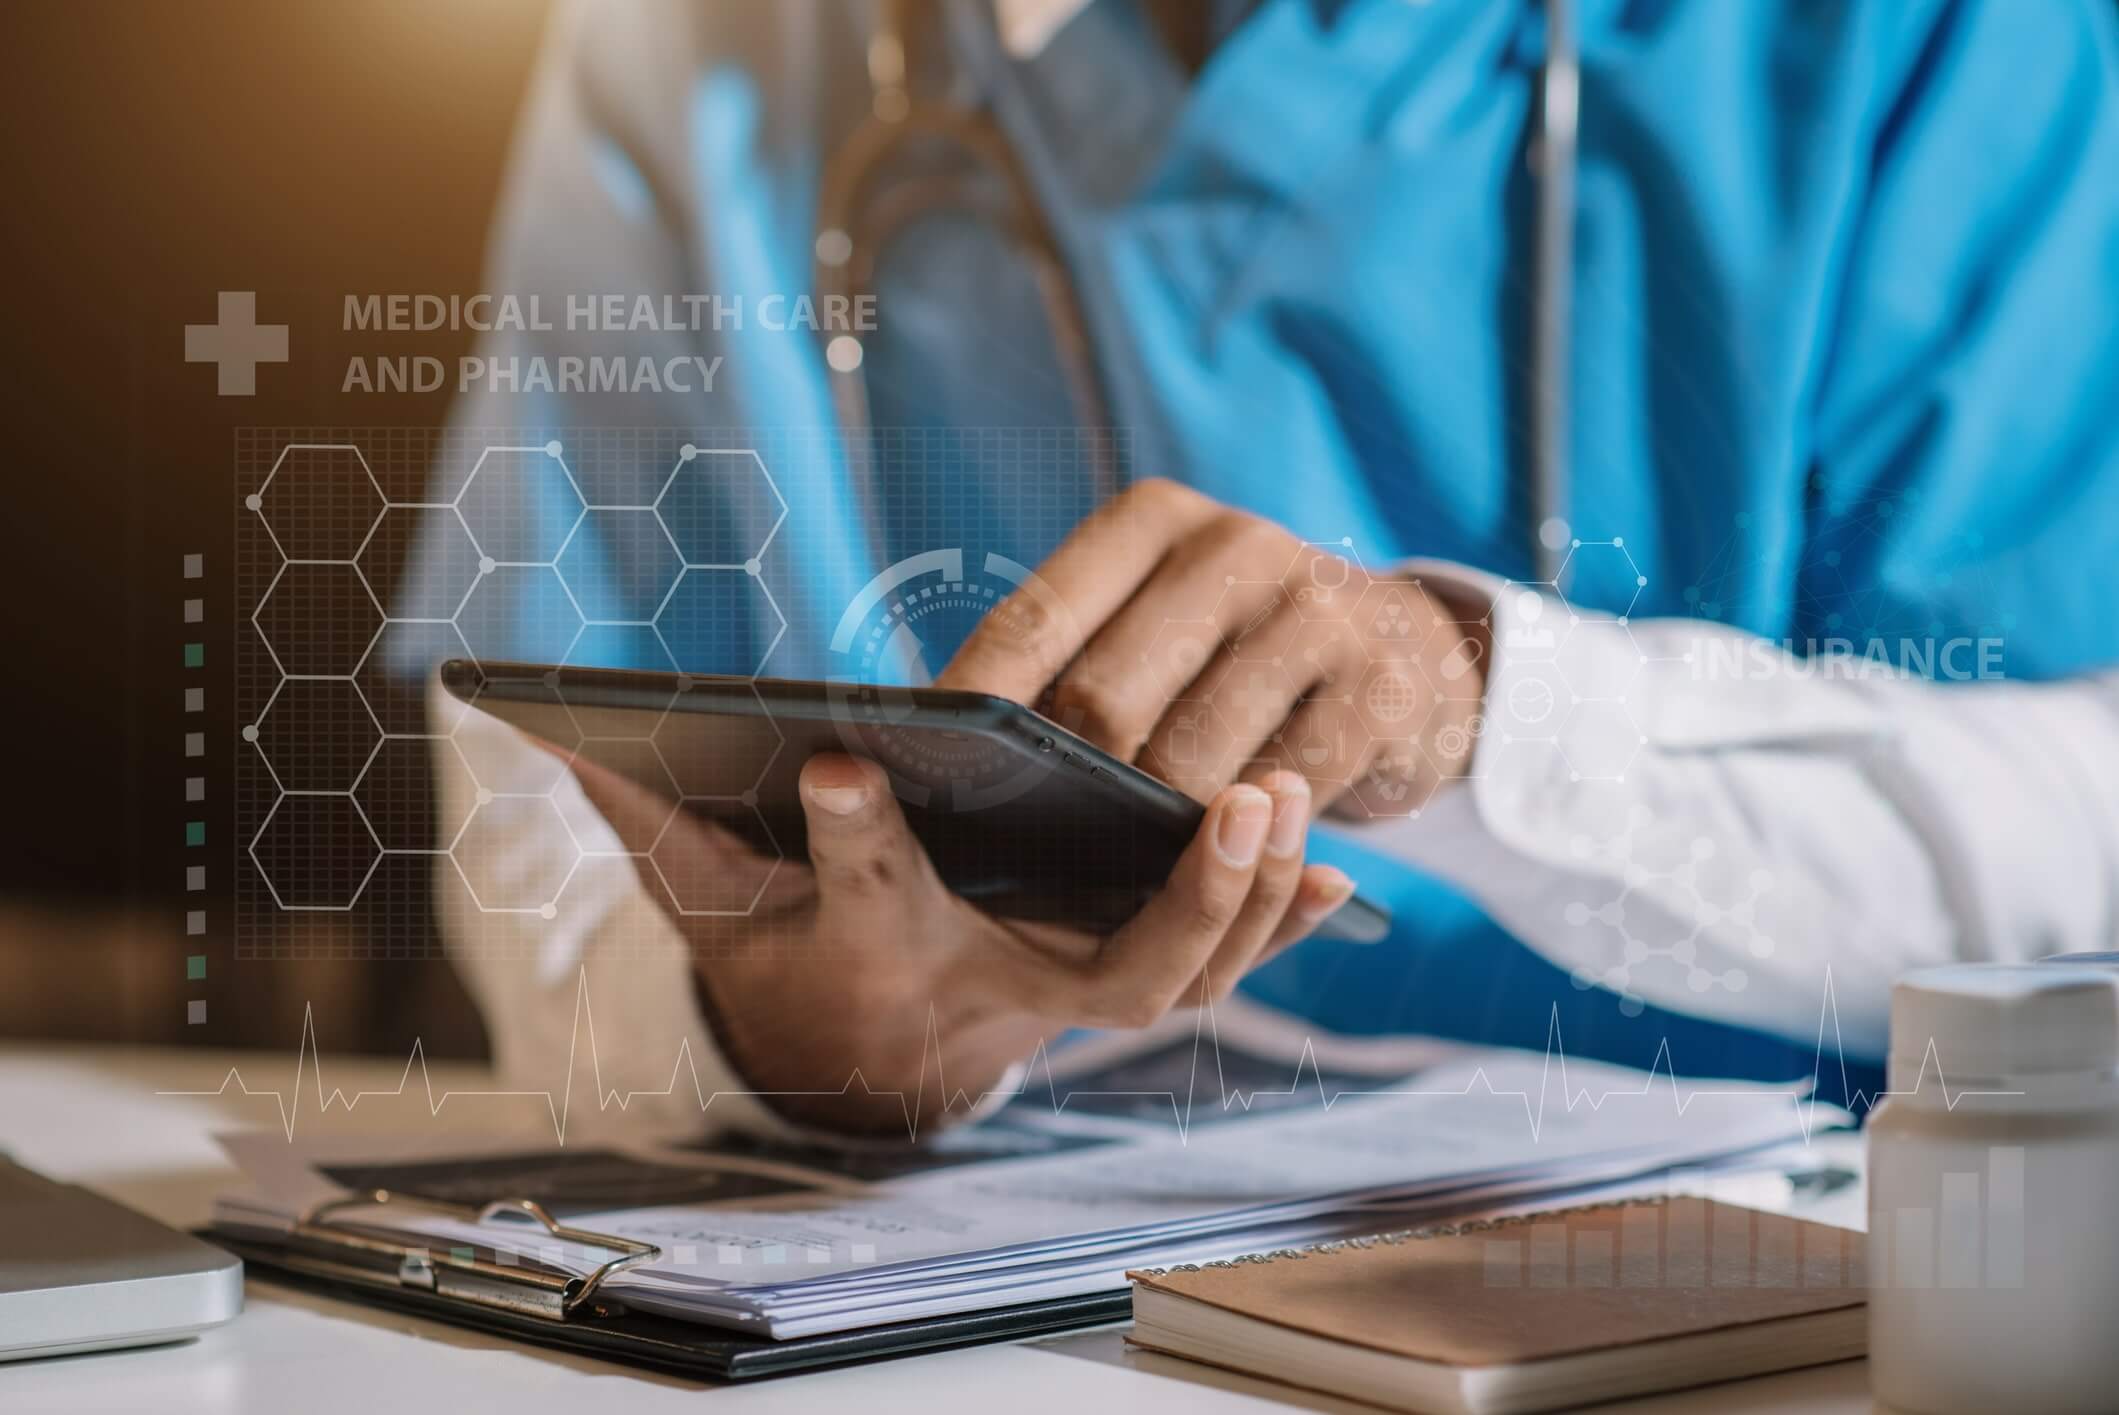 How Meaningful Use and EHR have impacted healthcare